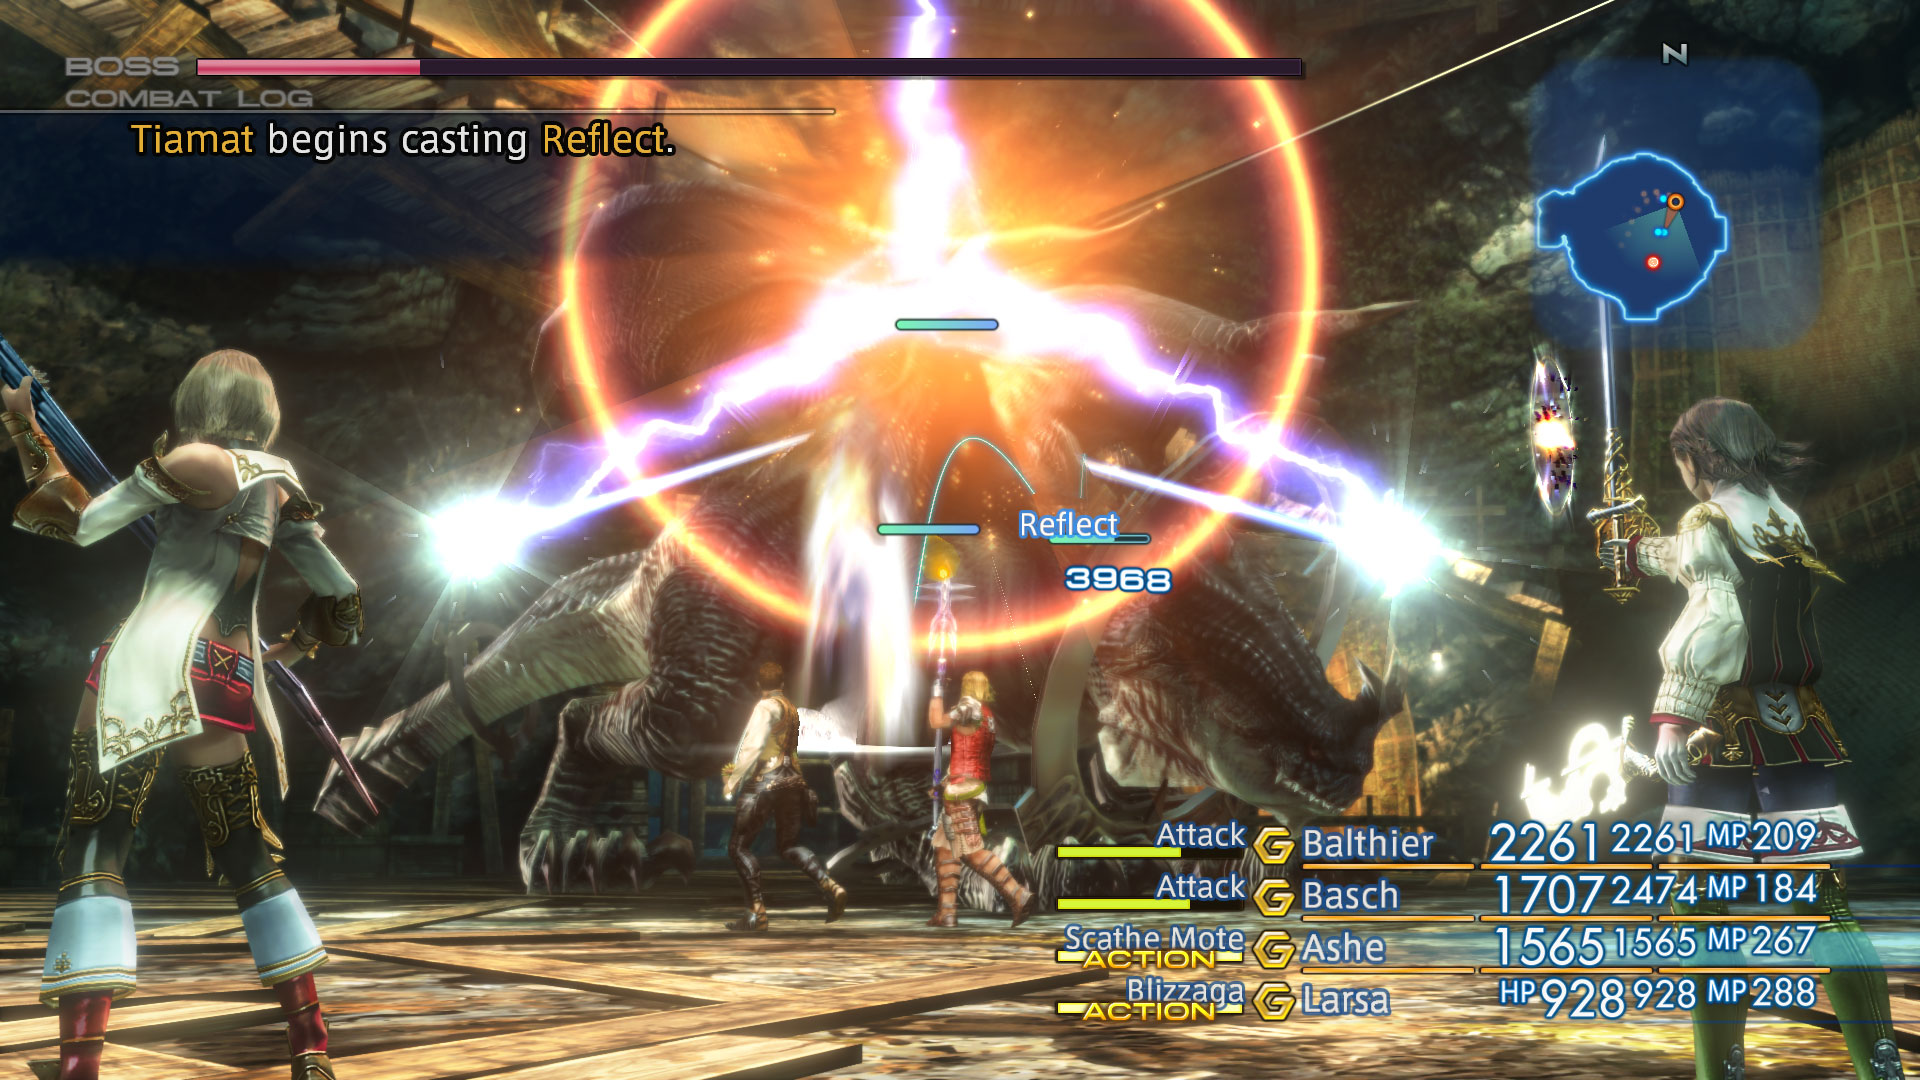 Final Fantasy Xii The Zodiac Age Gets A New Trailer Showing Off The Gambit System Godisageek Com